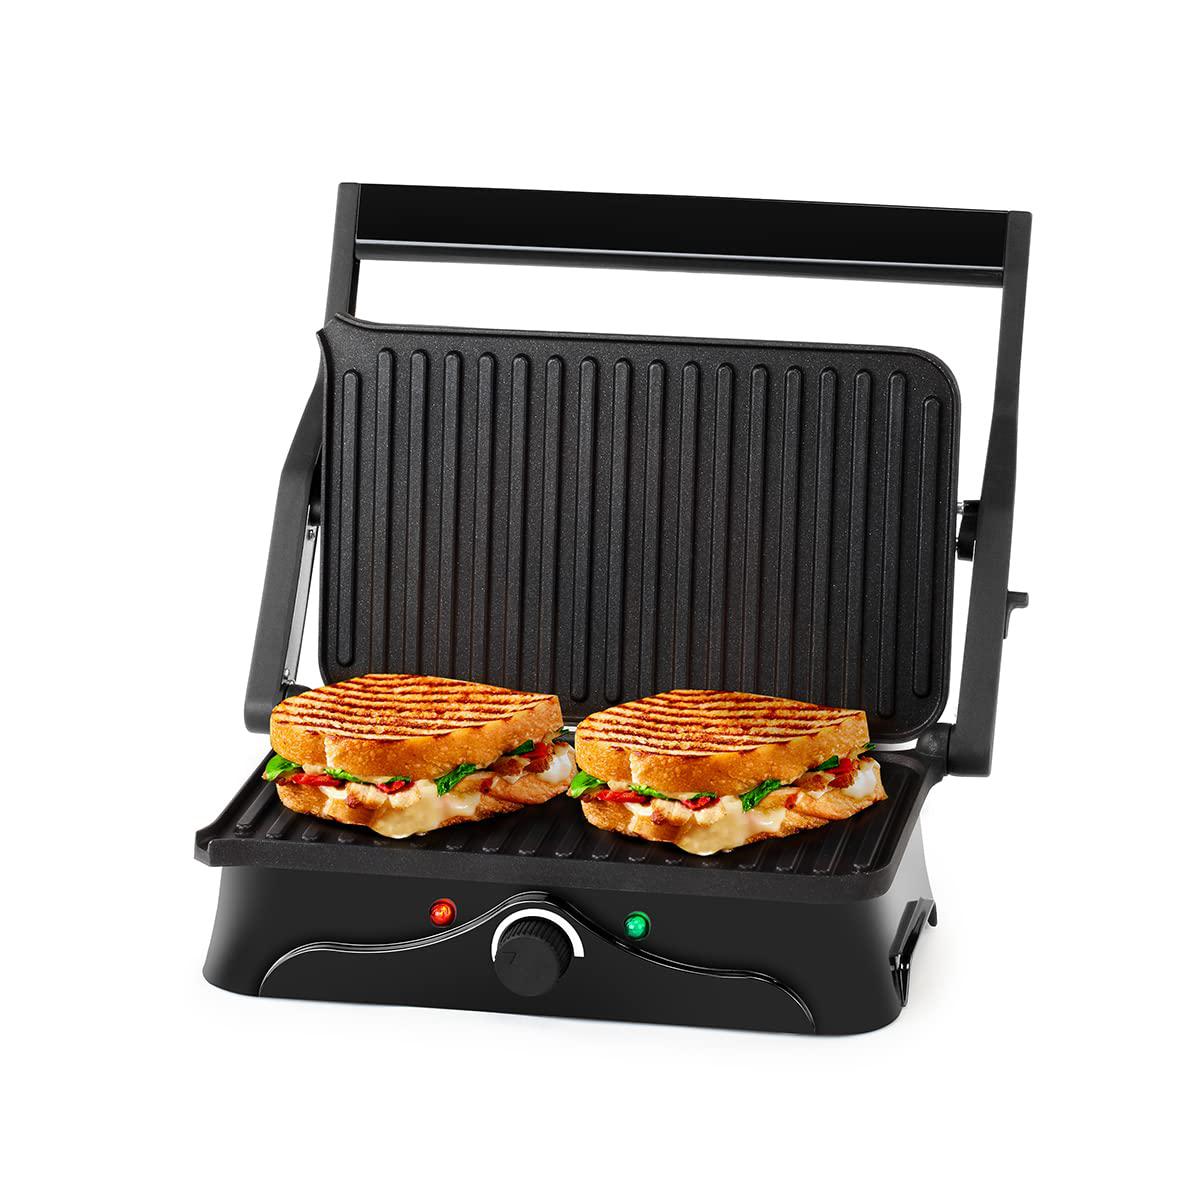 holstein housewares 2-slice panini press and grill - black/stainless steel sandwich maker with non-stick coating, temperature